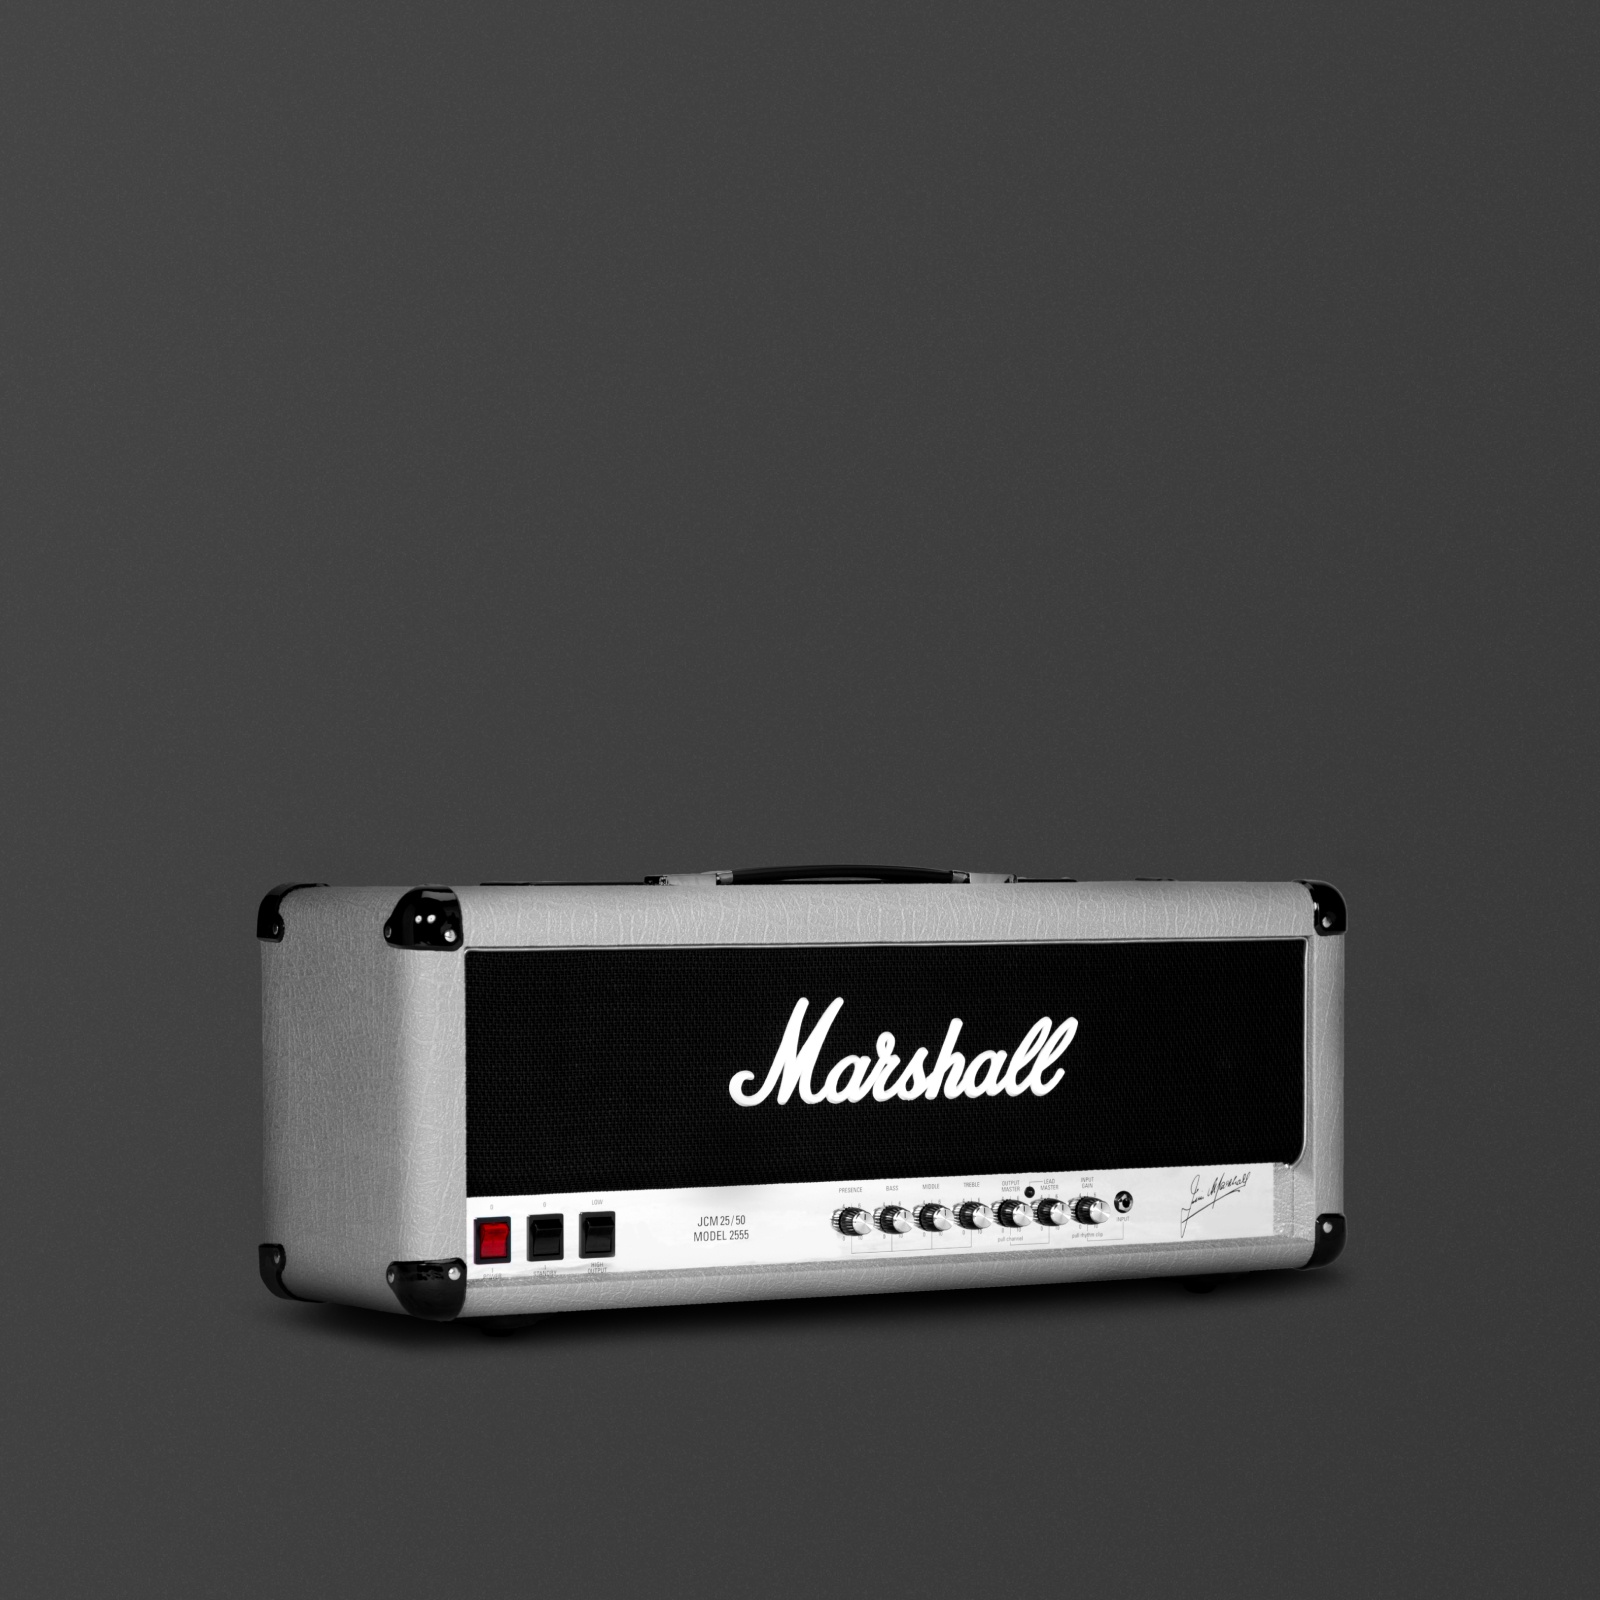 The Marshall Silver Jubilee 2555X Vintage Reissue Head angled image to the right.